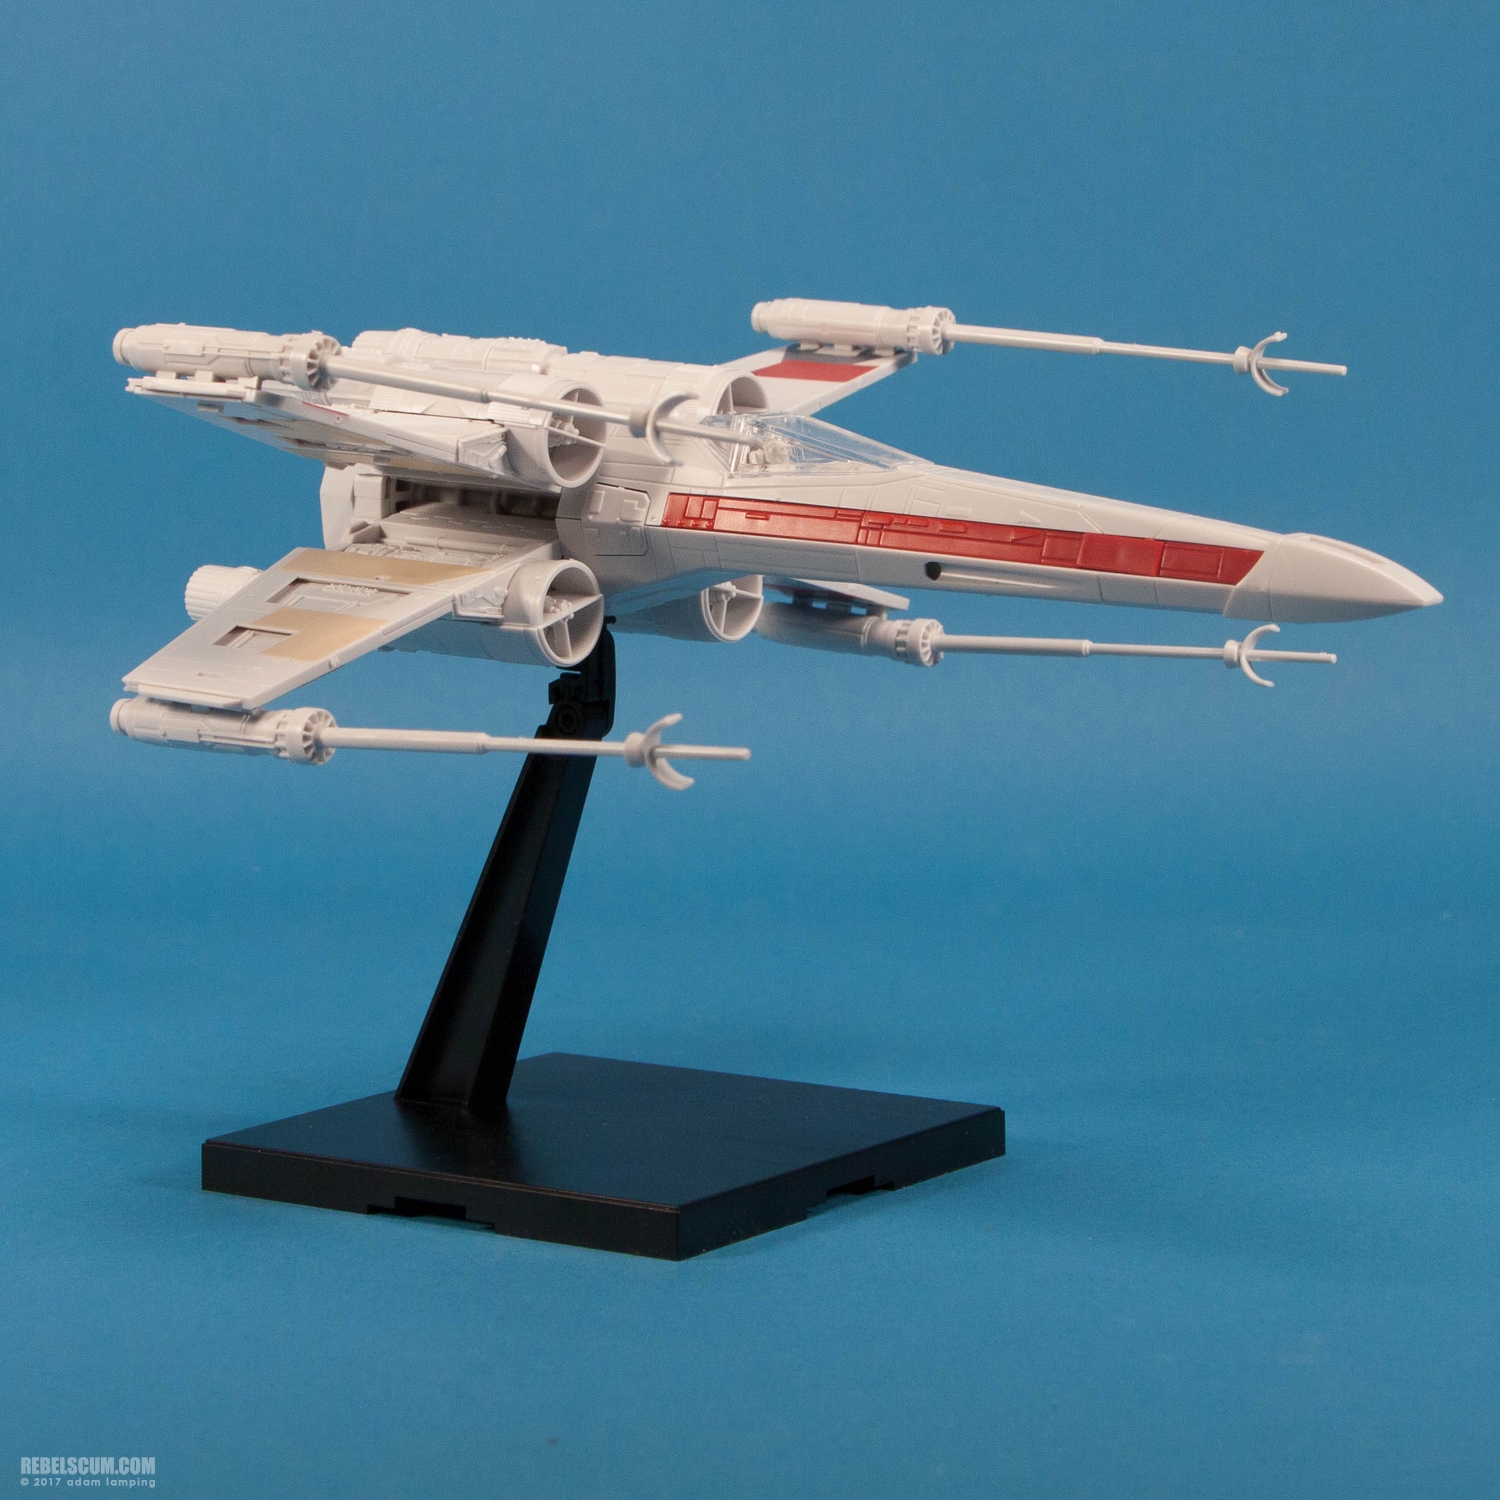 bandai-red-squadron-x-wing-starfighter-scale-model-kit-002.jpg